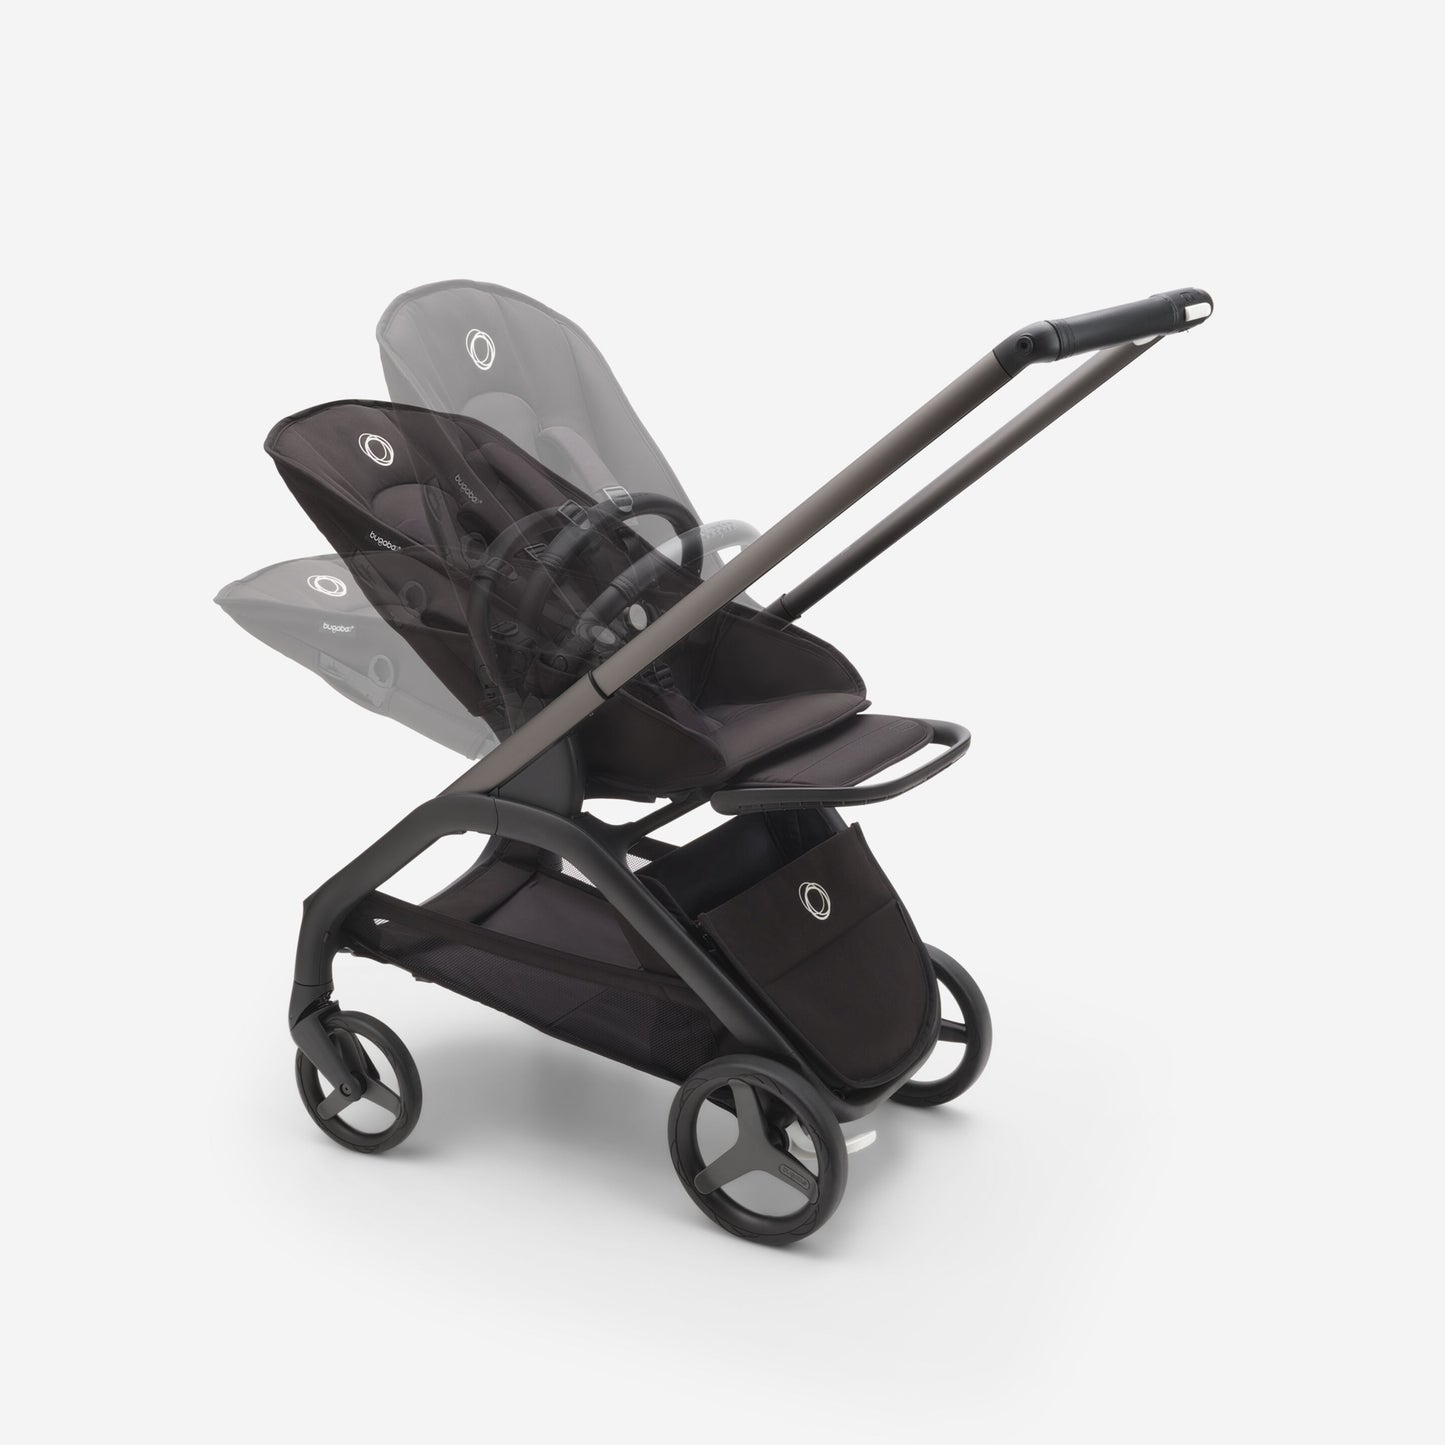 Bugaboo - Dragonfly  Complete Black/Midnight Black